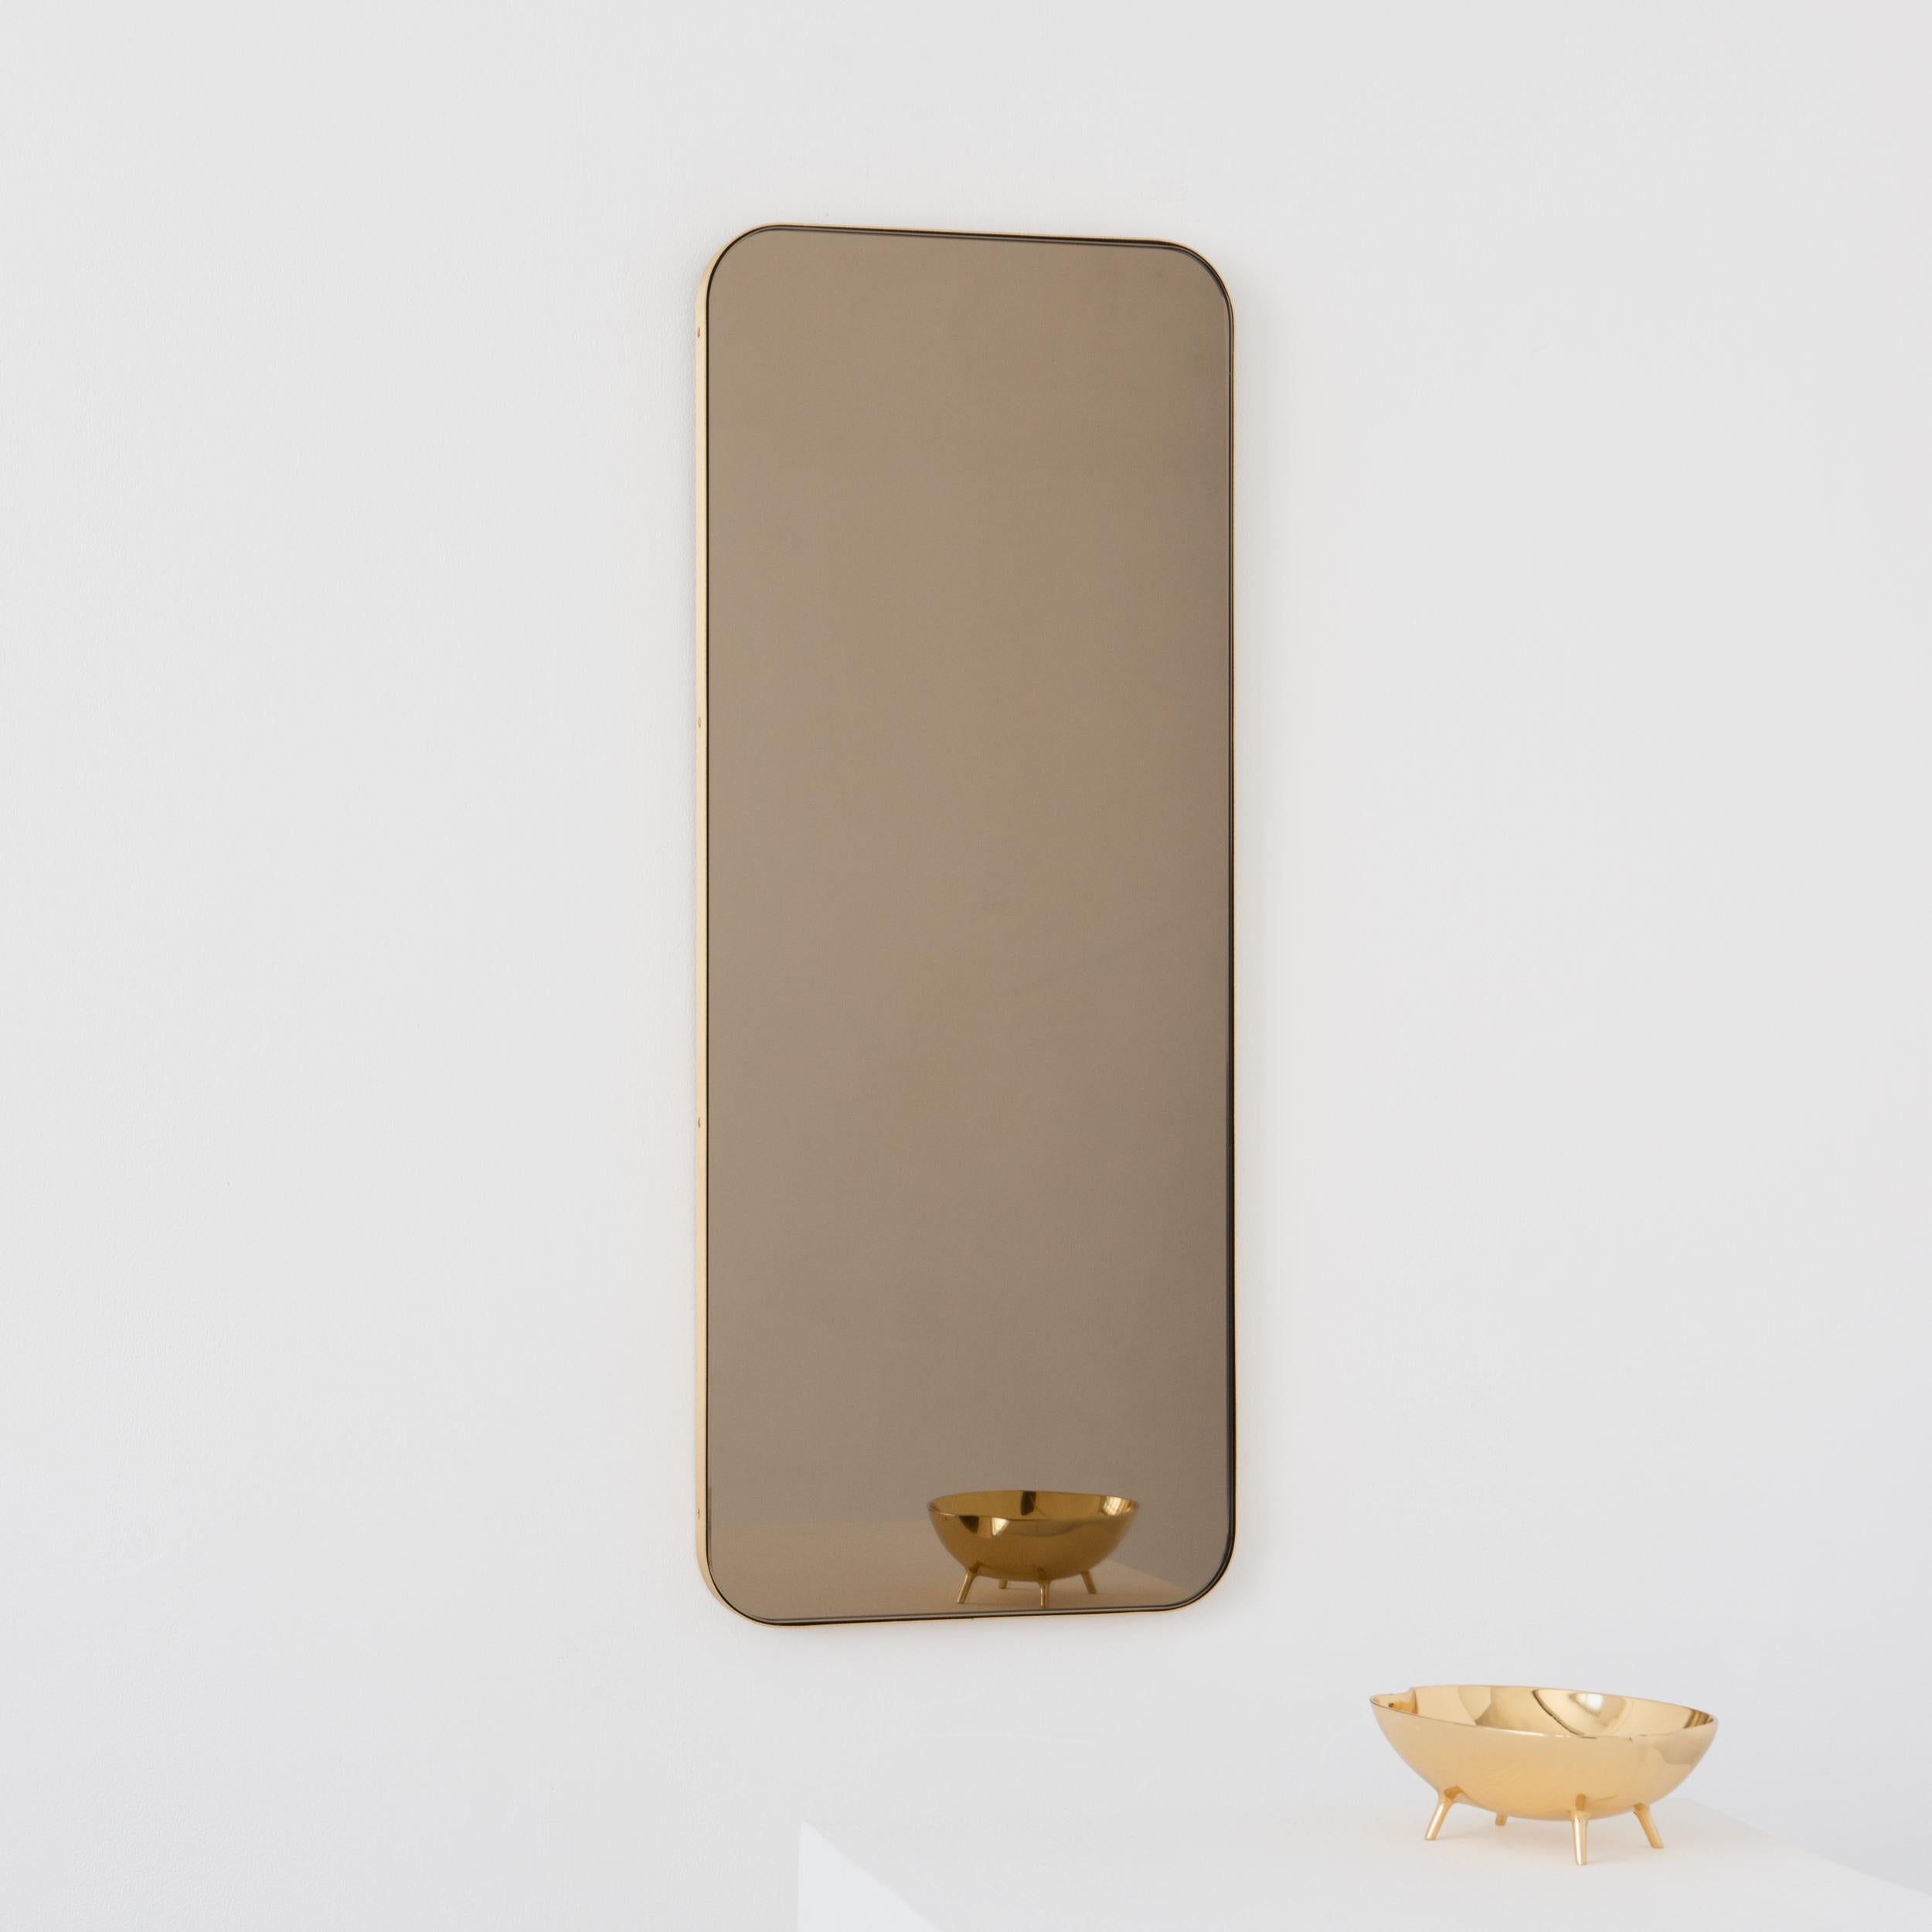 Modern bronze tinted rectangular mirror with an elegant solid brushed brass frame. Part of the charming Quadris collection, designed and handcrafted in London, UK. 

Medium, large and extra-large (37cm x 56cm, 46cm x 71cm and 48cm x 97cm) mirrors